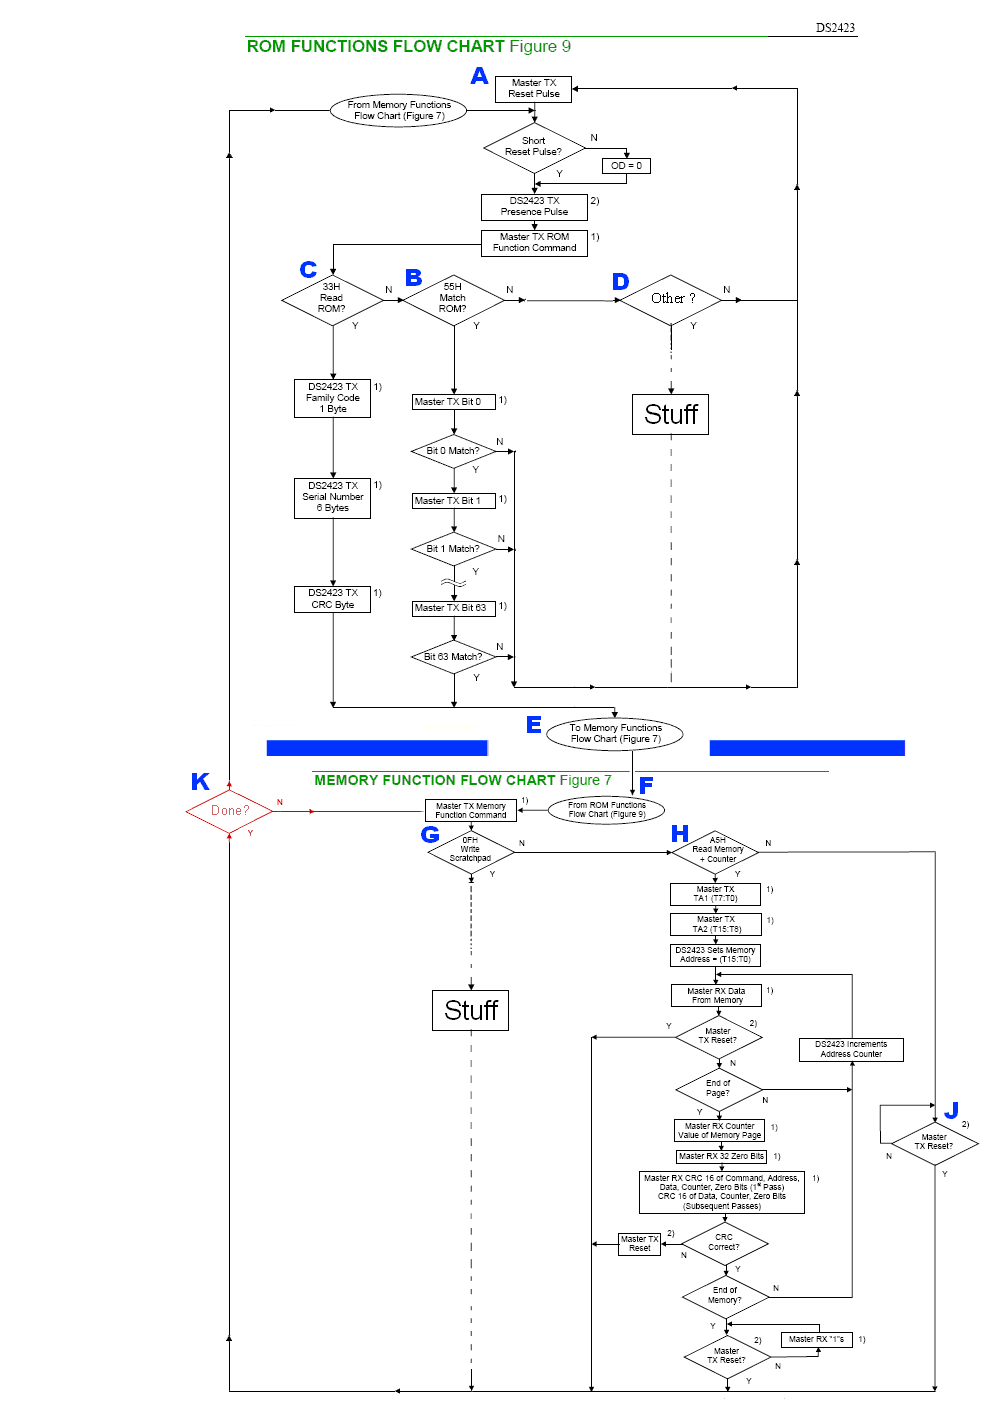 Diagram of 1-Wire or MicroLan operations